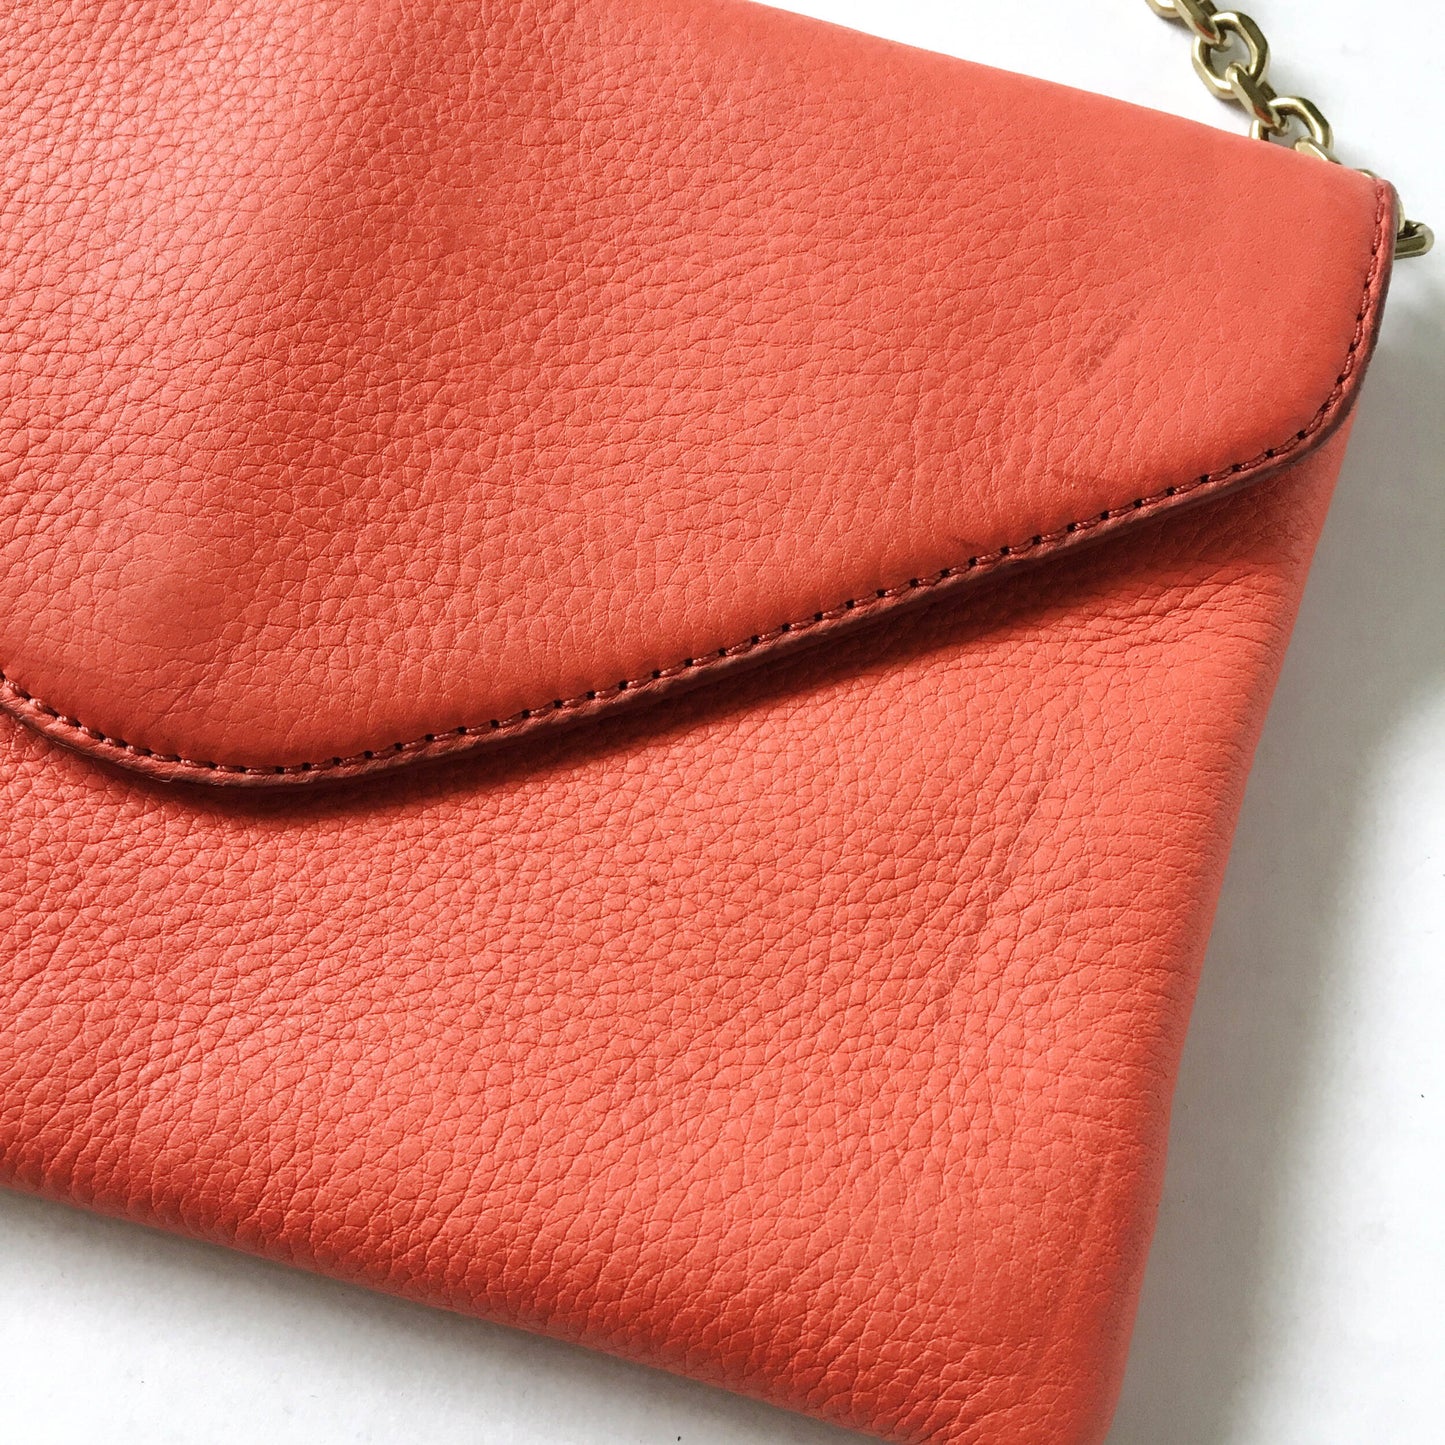 J Crew leather envelope clutch with chain